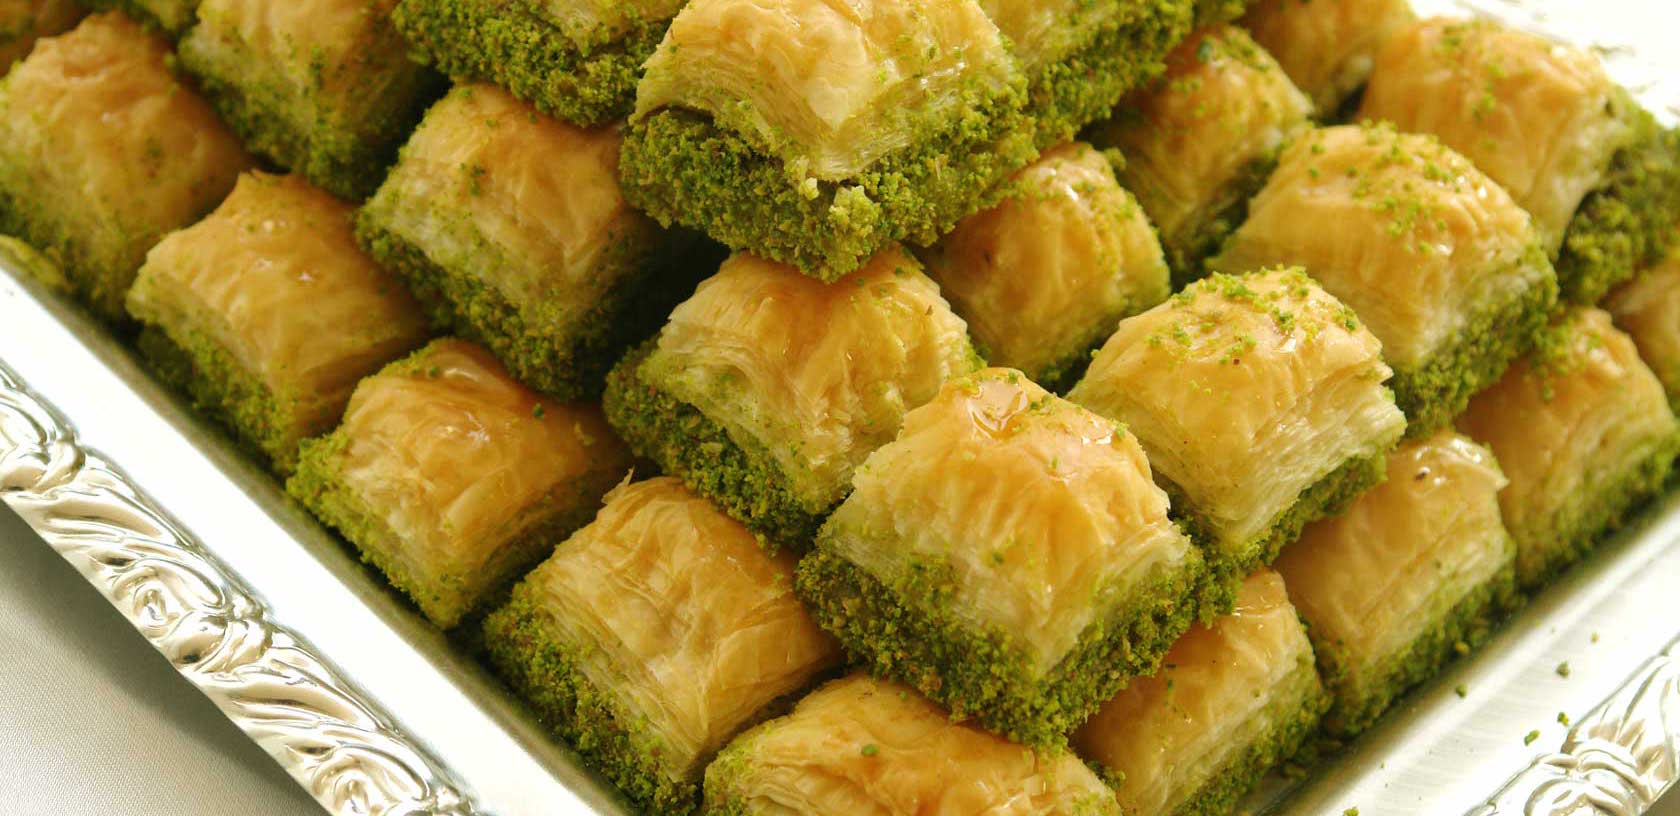 10 Delicious Turkish Desserts and Sweets to Try - Property Turkey